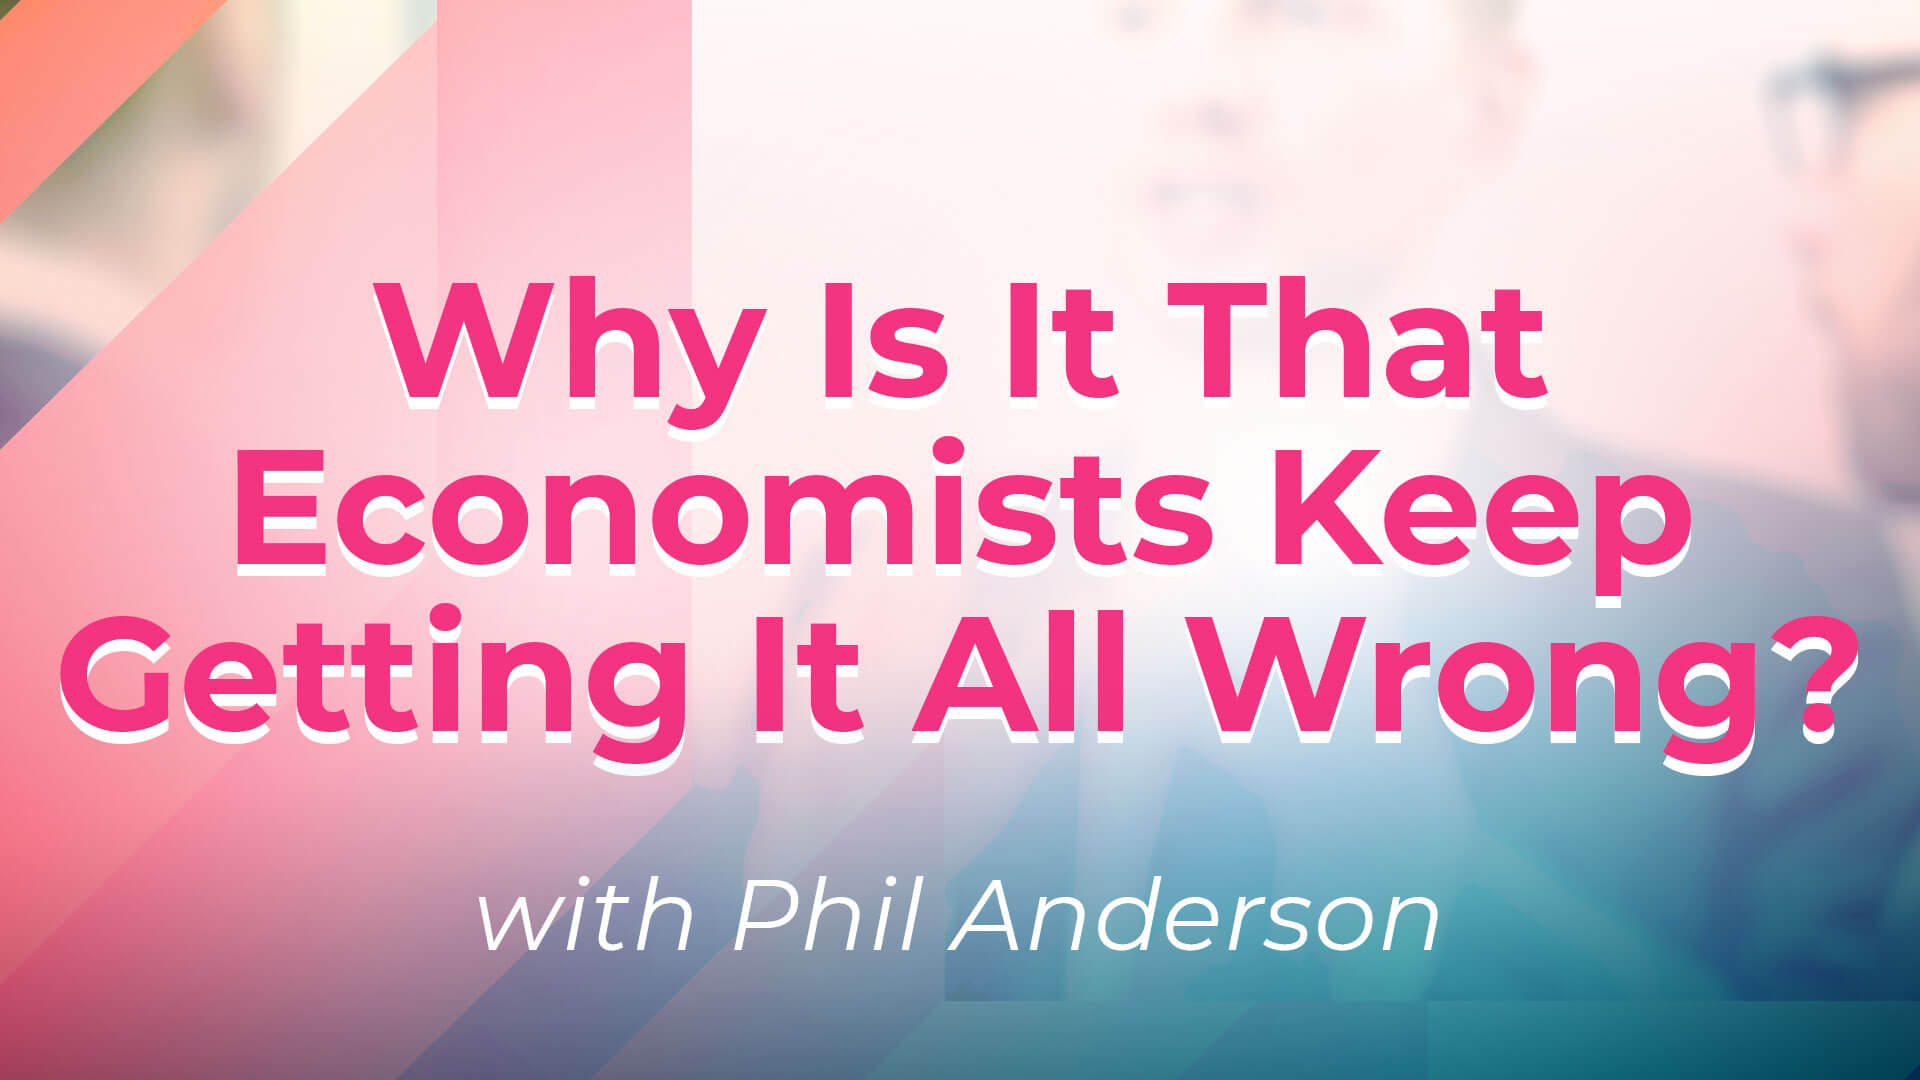 Economists Will Never Be Able to Forecast, Stop Listening to Them. Here’s Why - Phil Anderson Archives